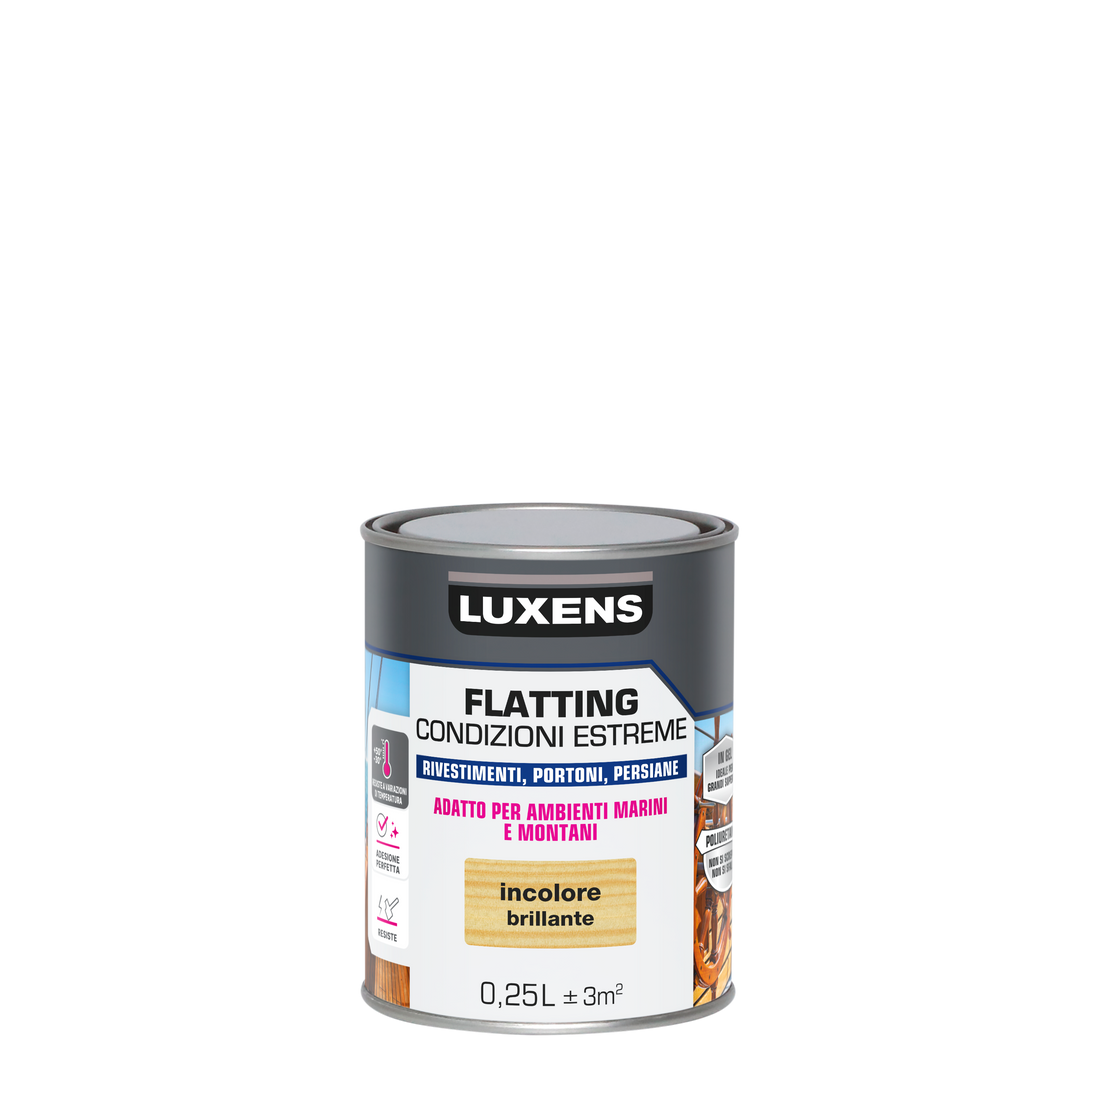 SOLVENT-BASED EXTREME CLIMATE FLATTING 250ML LUXENS